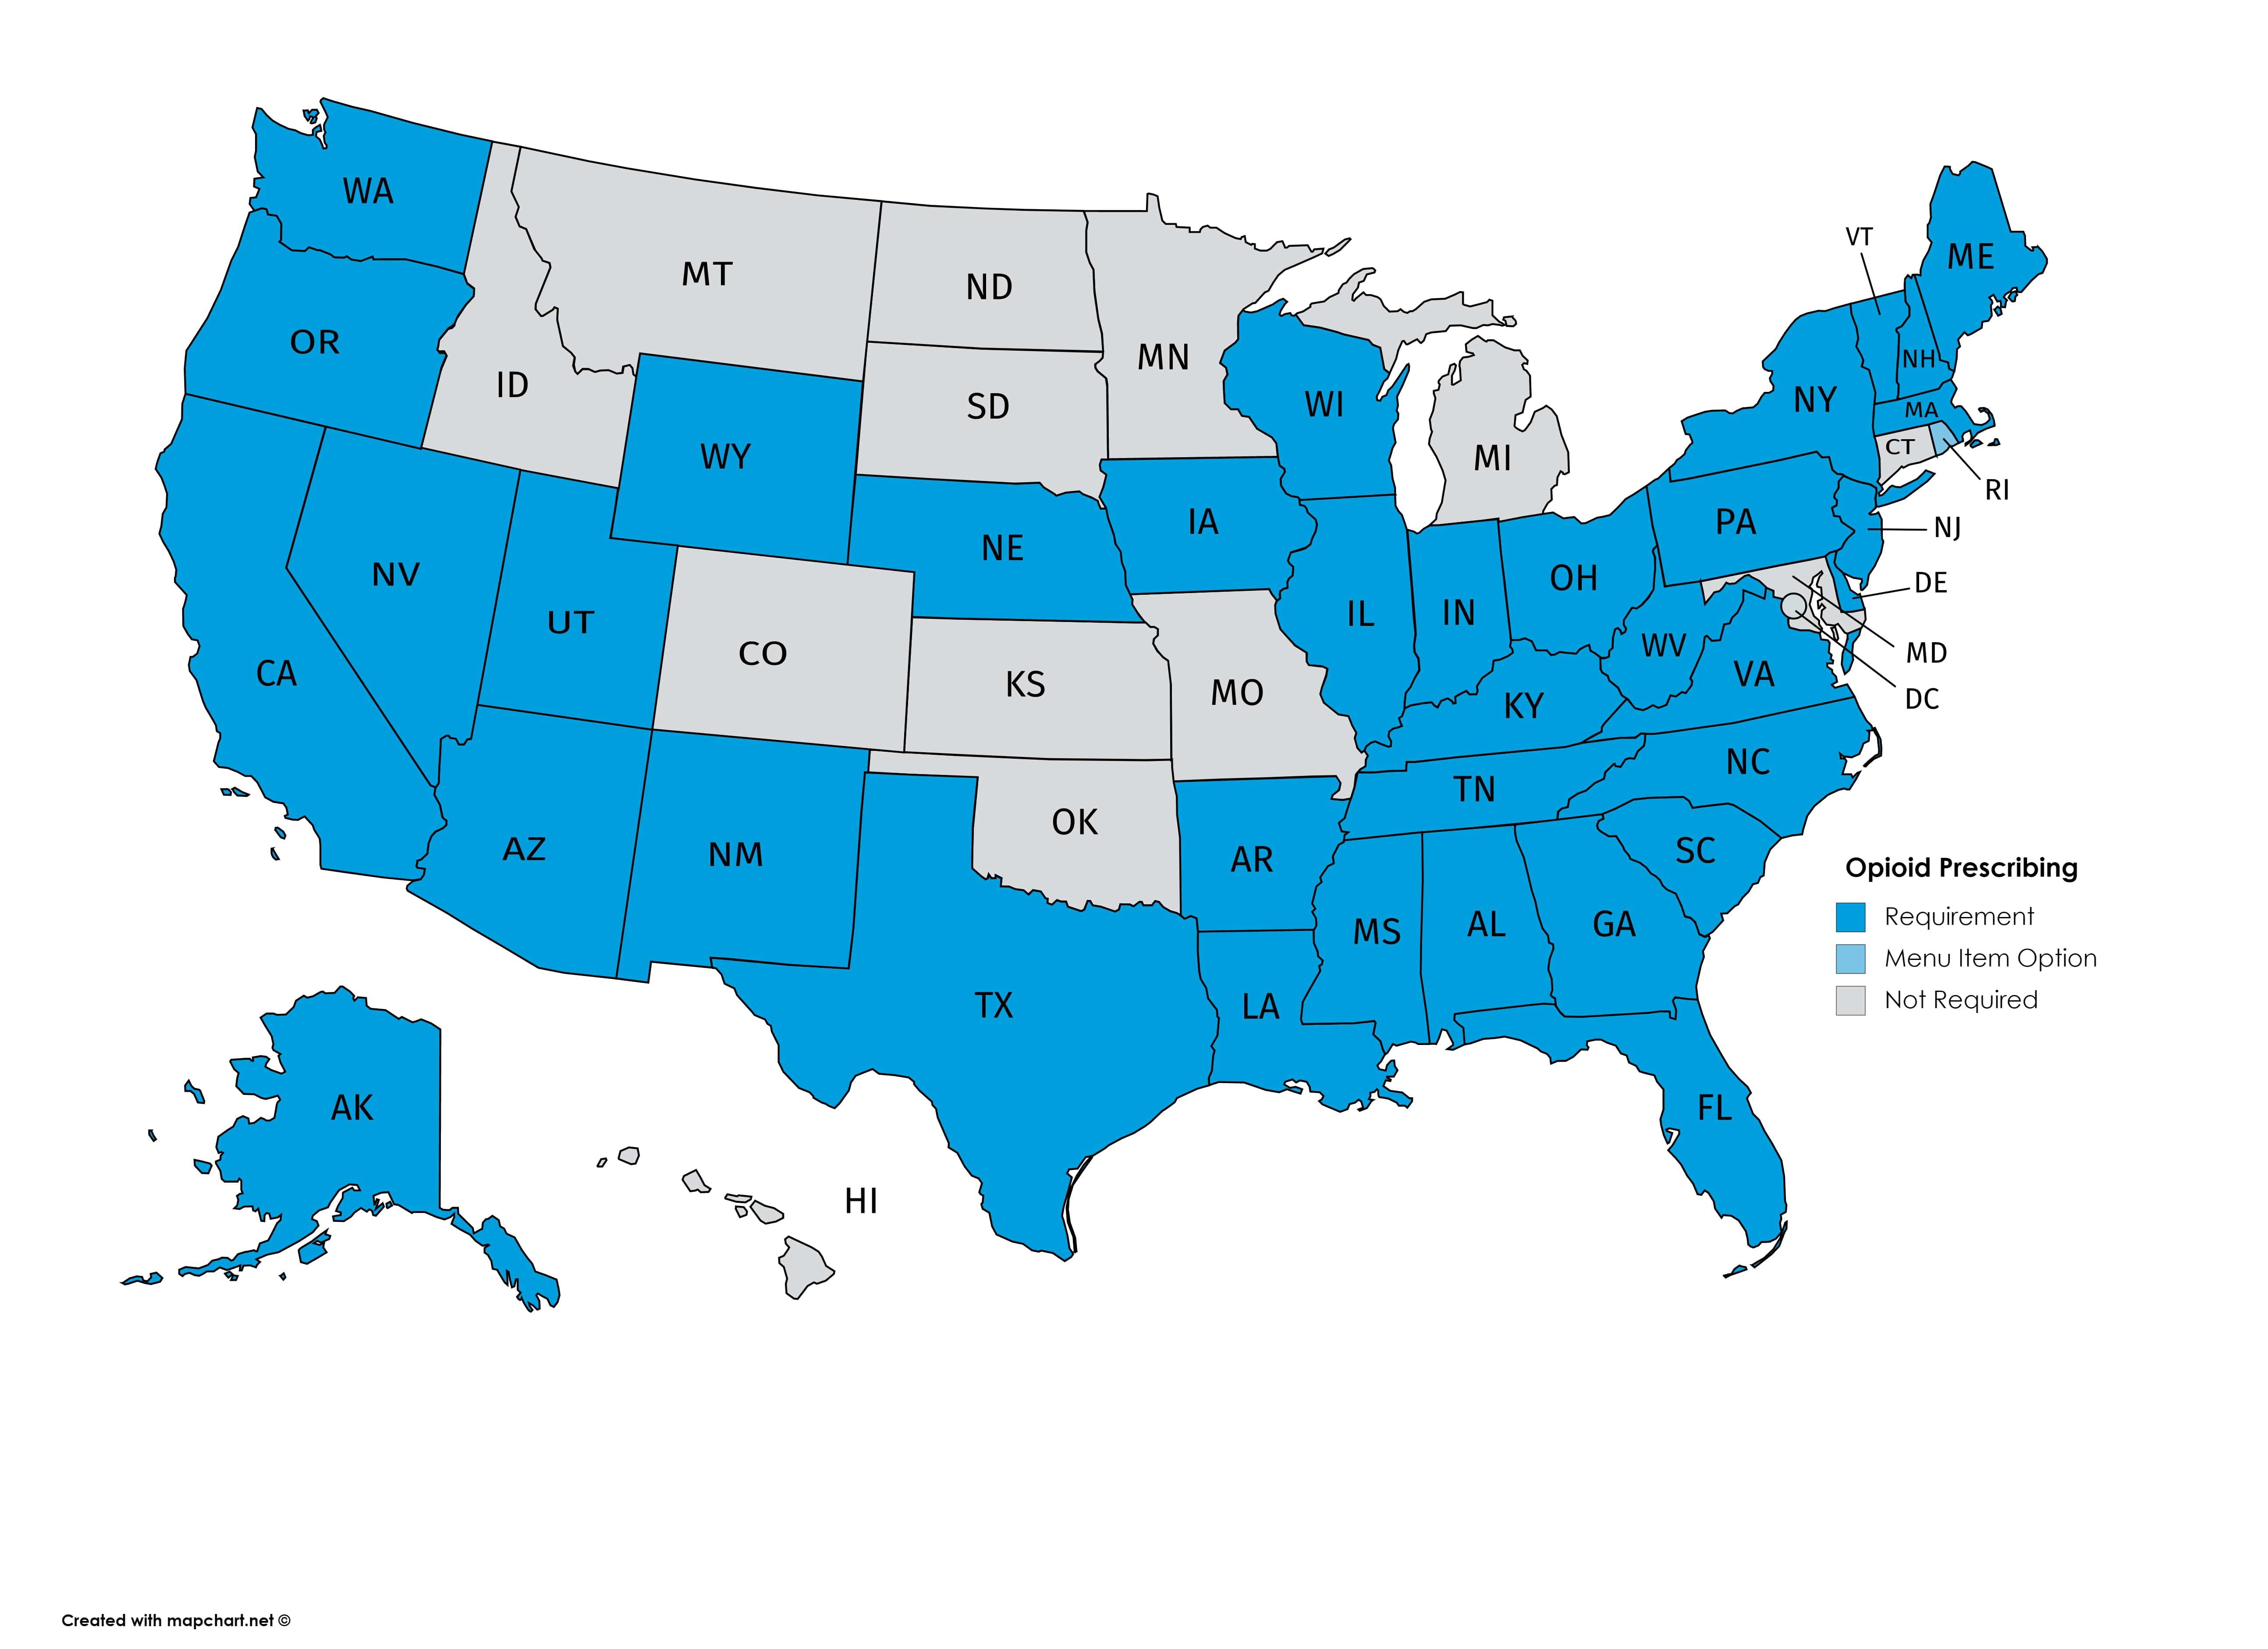 US Map Depicting Continuing Medical Education (CME) on Opioid Prescribing, 2020